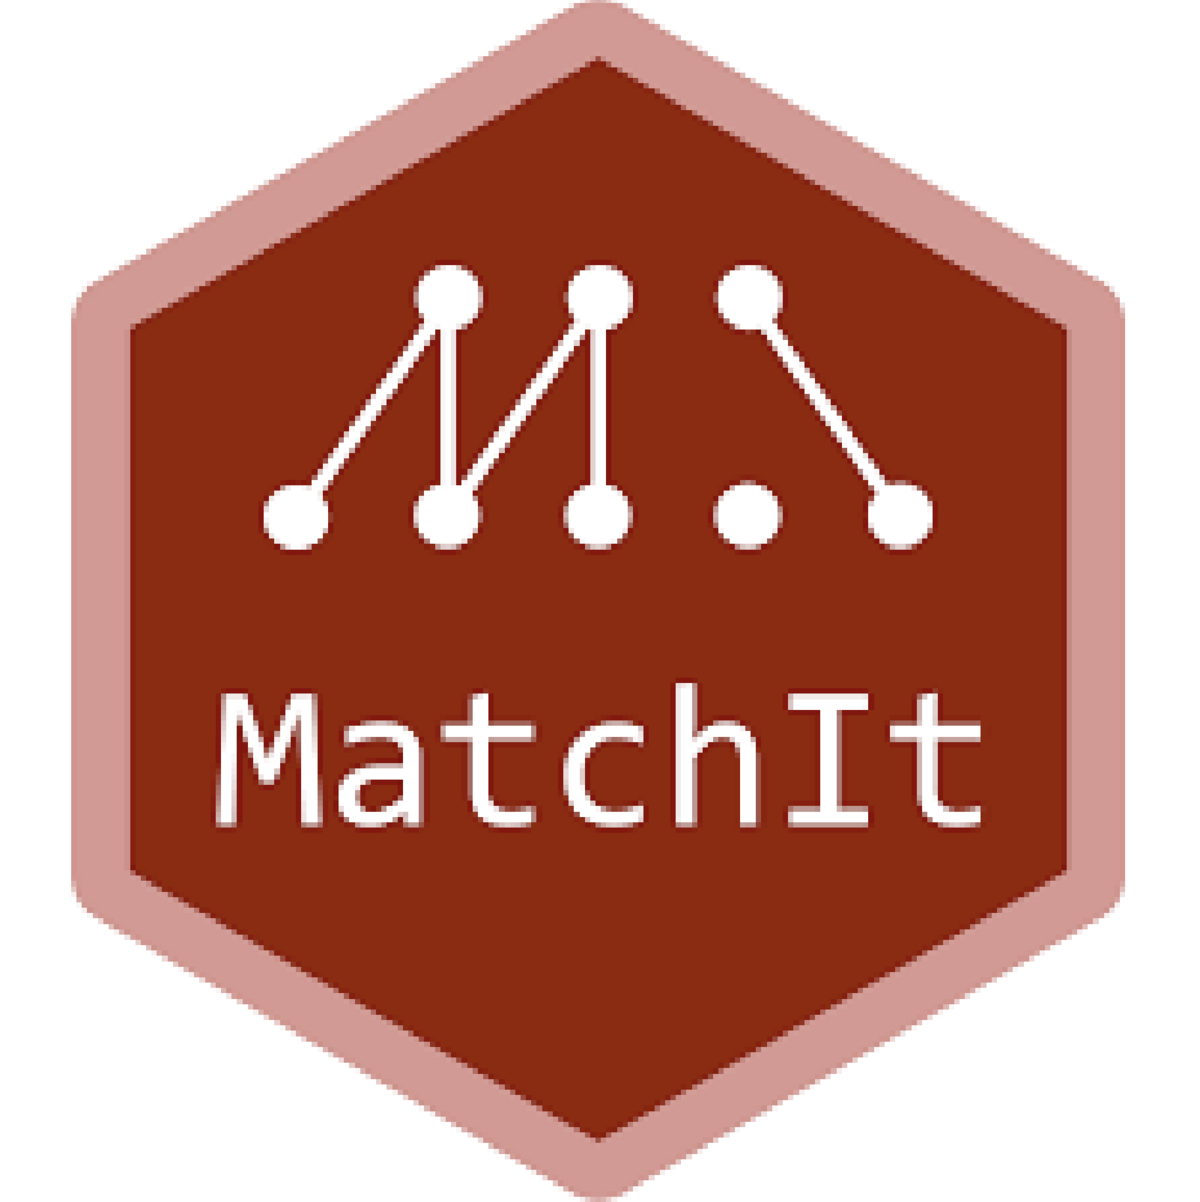 A red hexagon with a logo made up of lines and dots and the name "MatchIt"